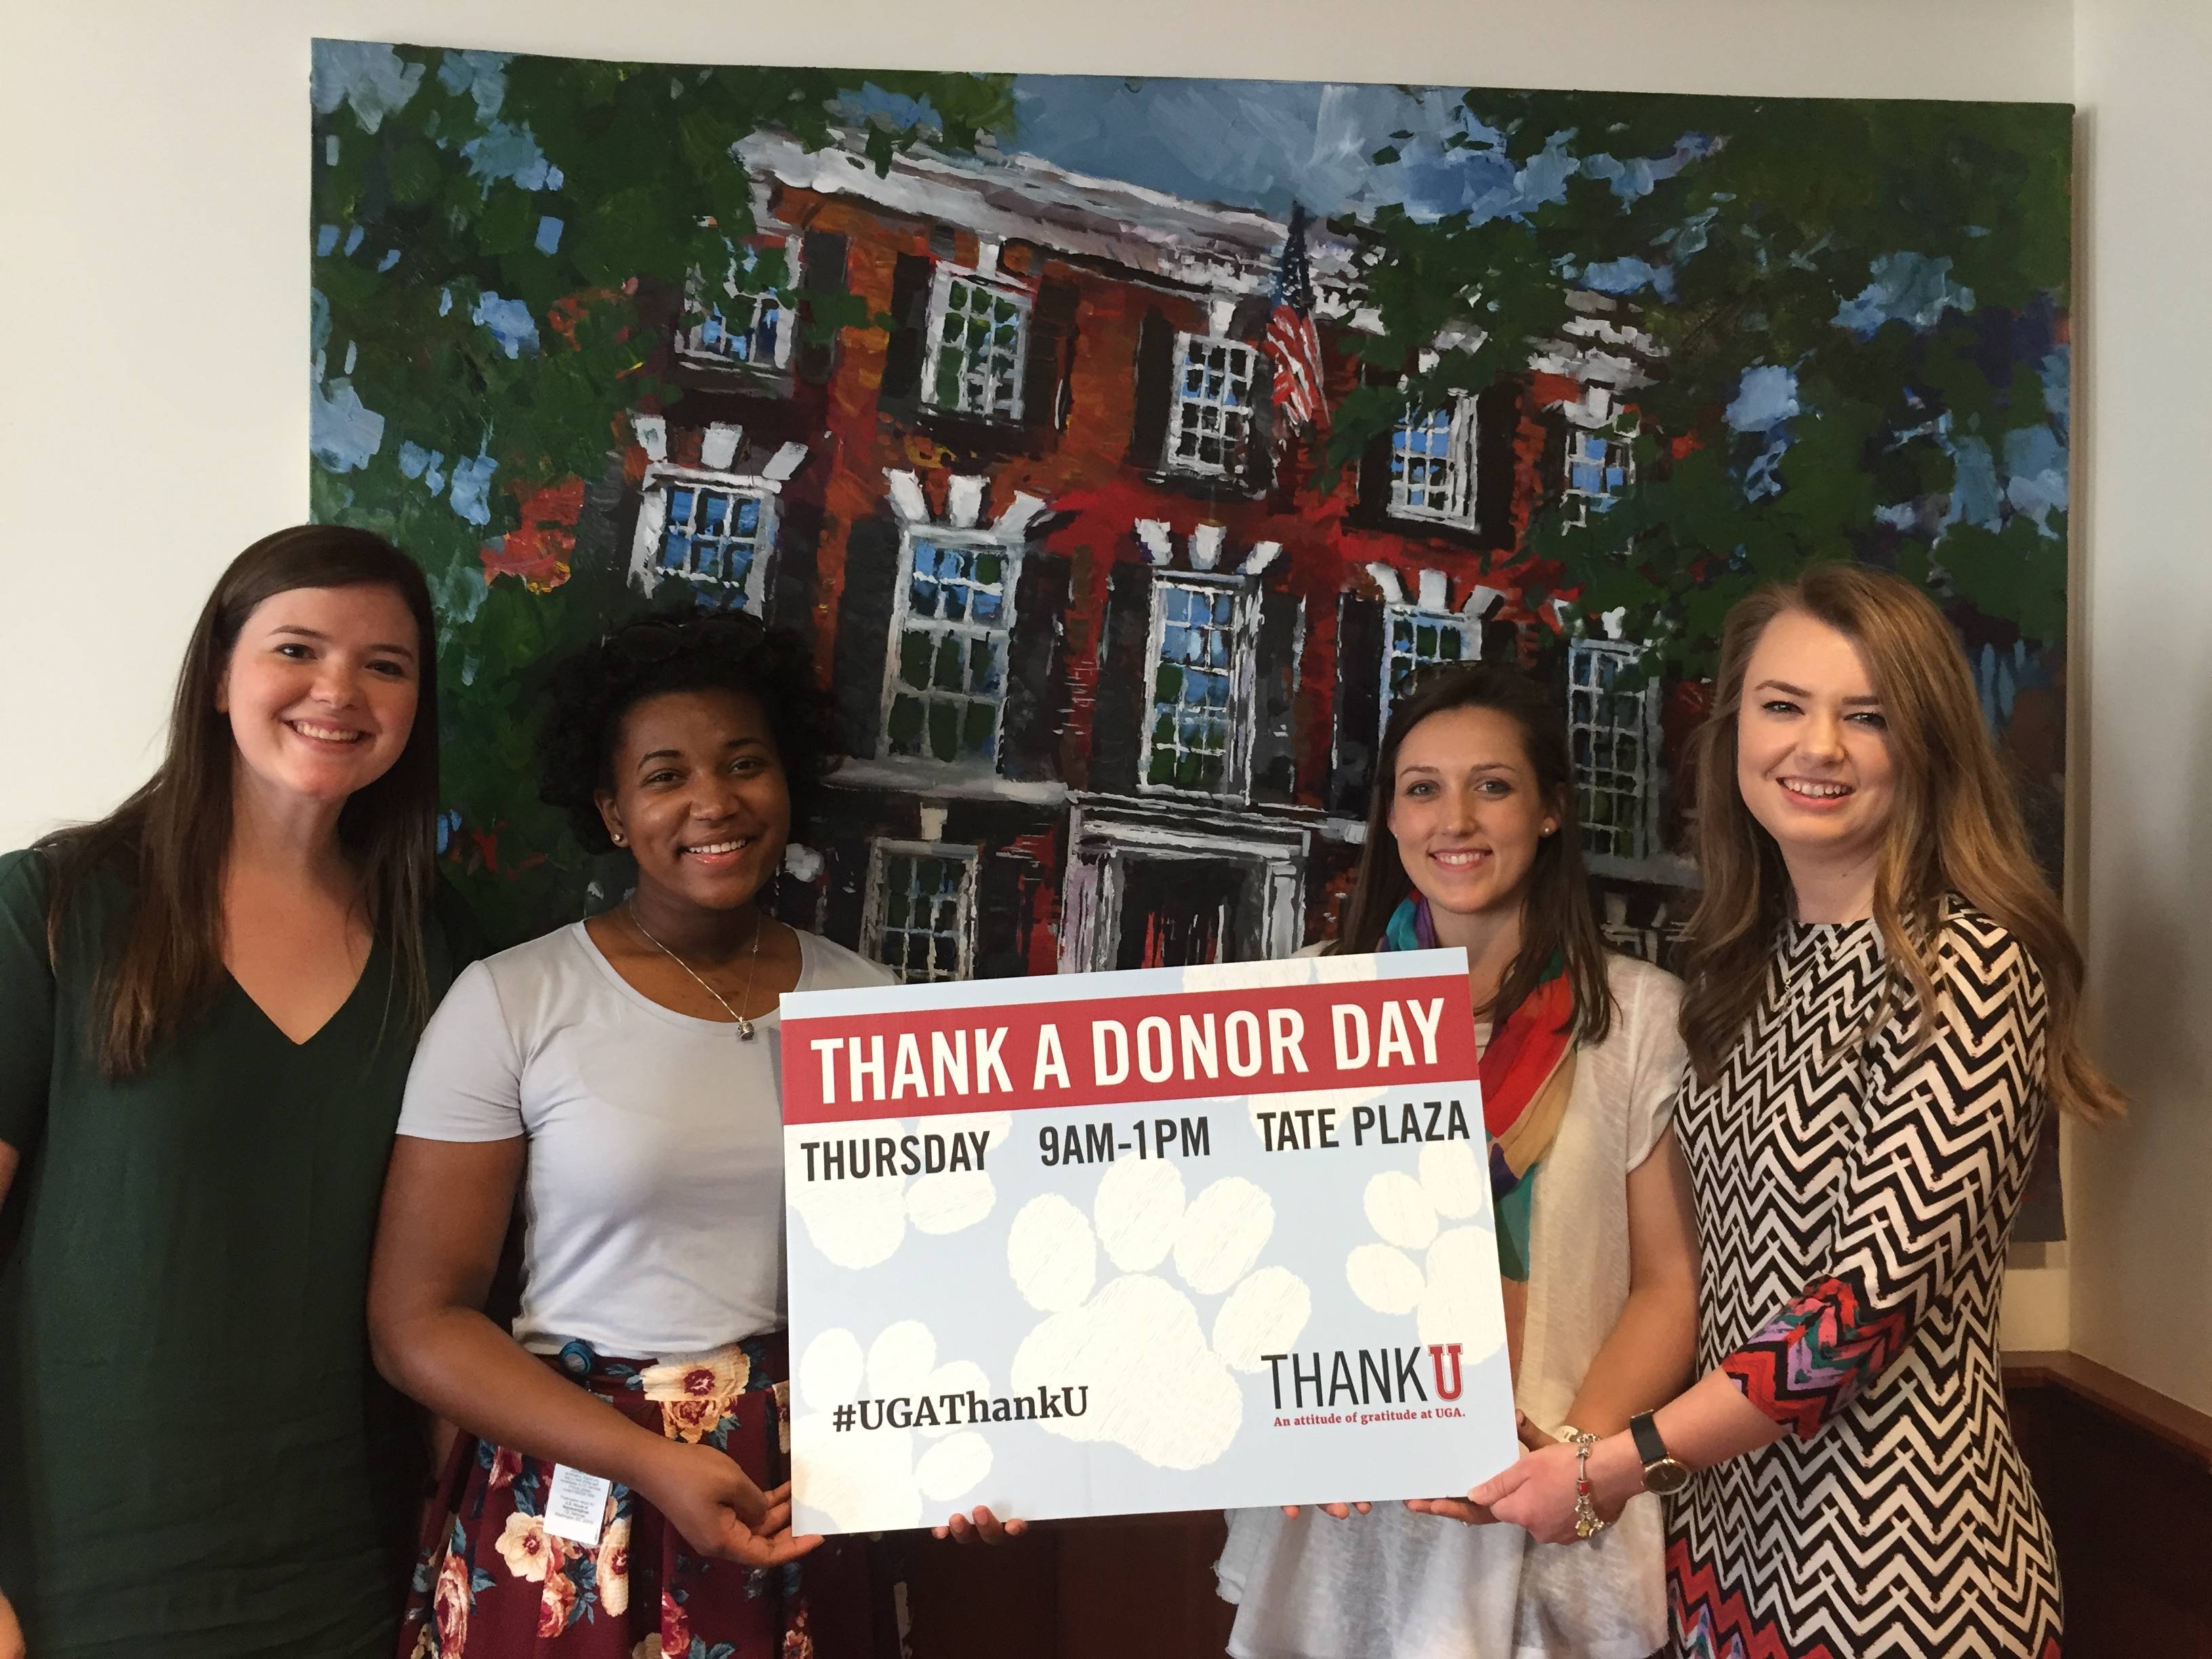 Students celebrating Thank A Donor Day at the University of Georgia